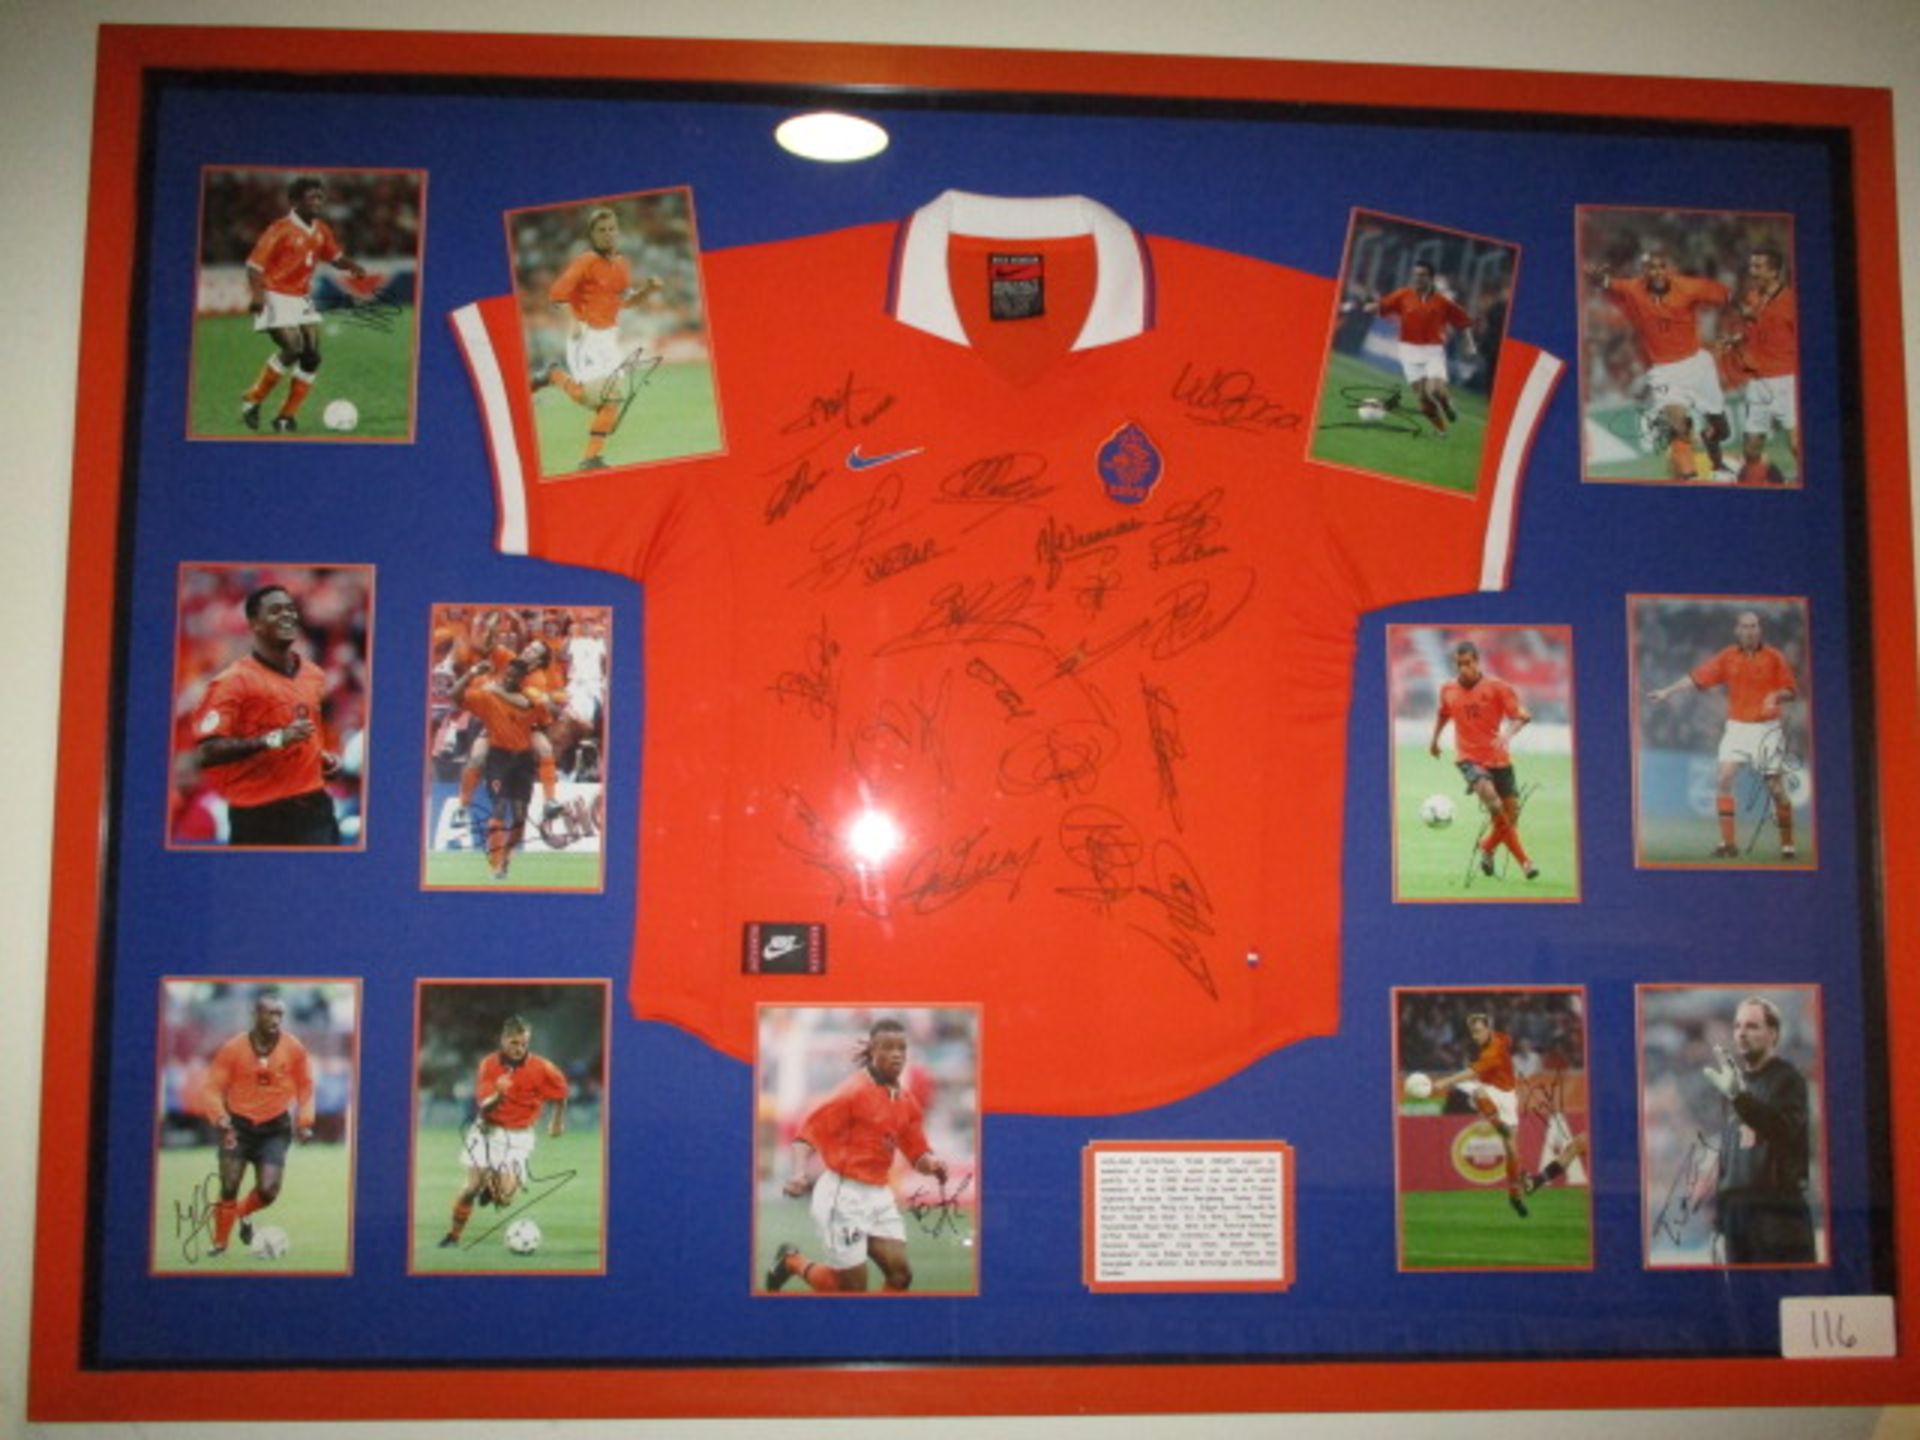 Holland National Team jersey - 1998 World Cup in France, 63-1/2in w x 46-1/2in hgt